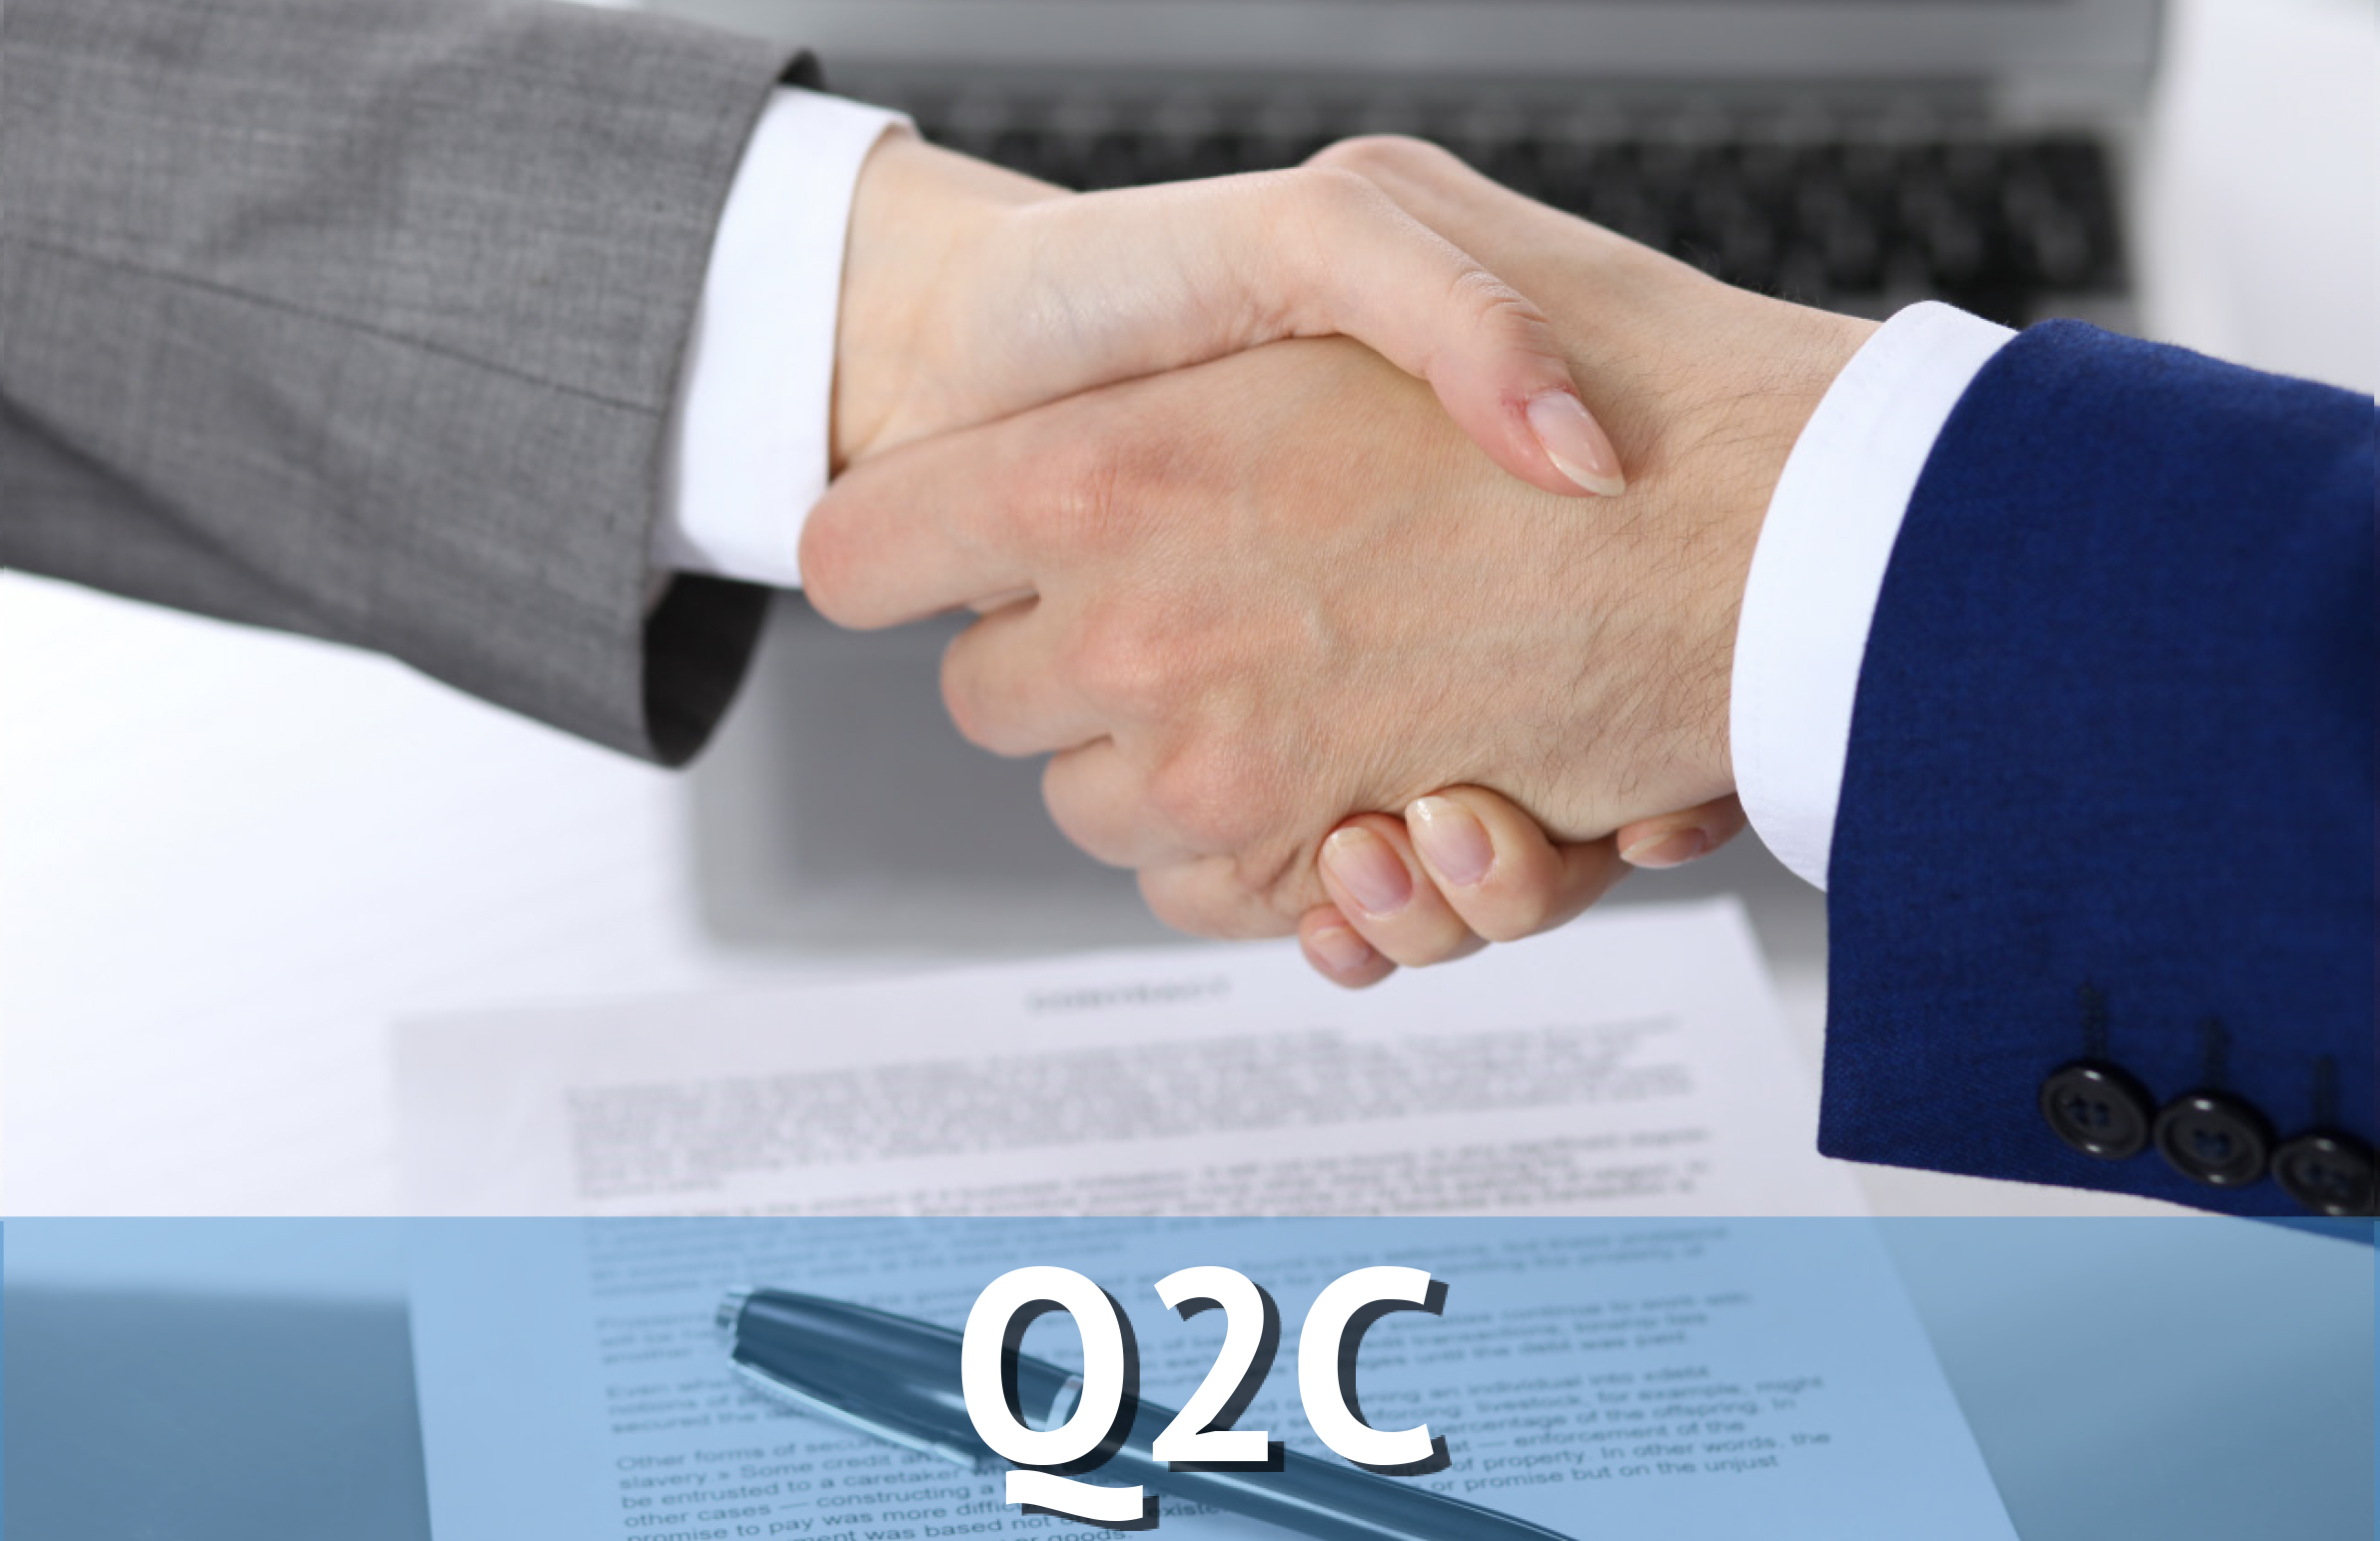 Handshake in Front of a Laptop & Signed Contract, Labeled Q2C